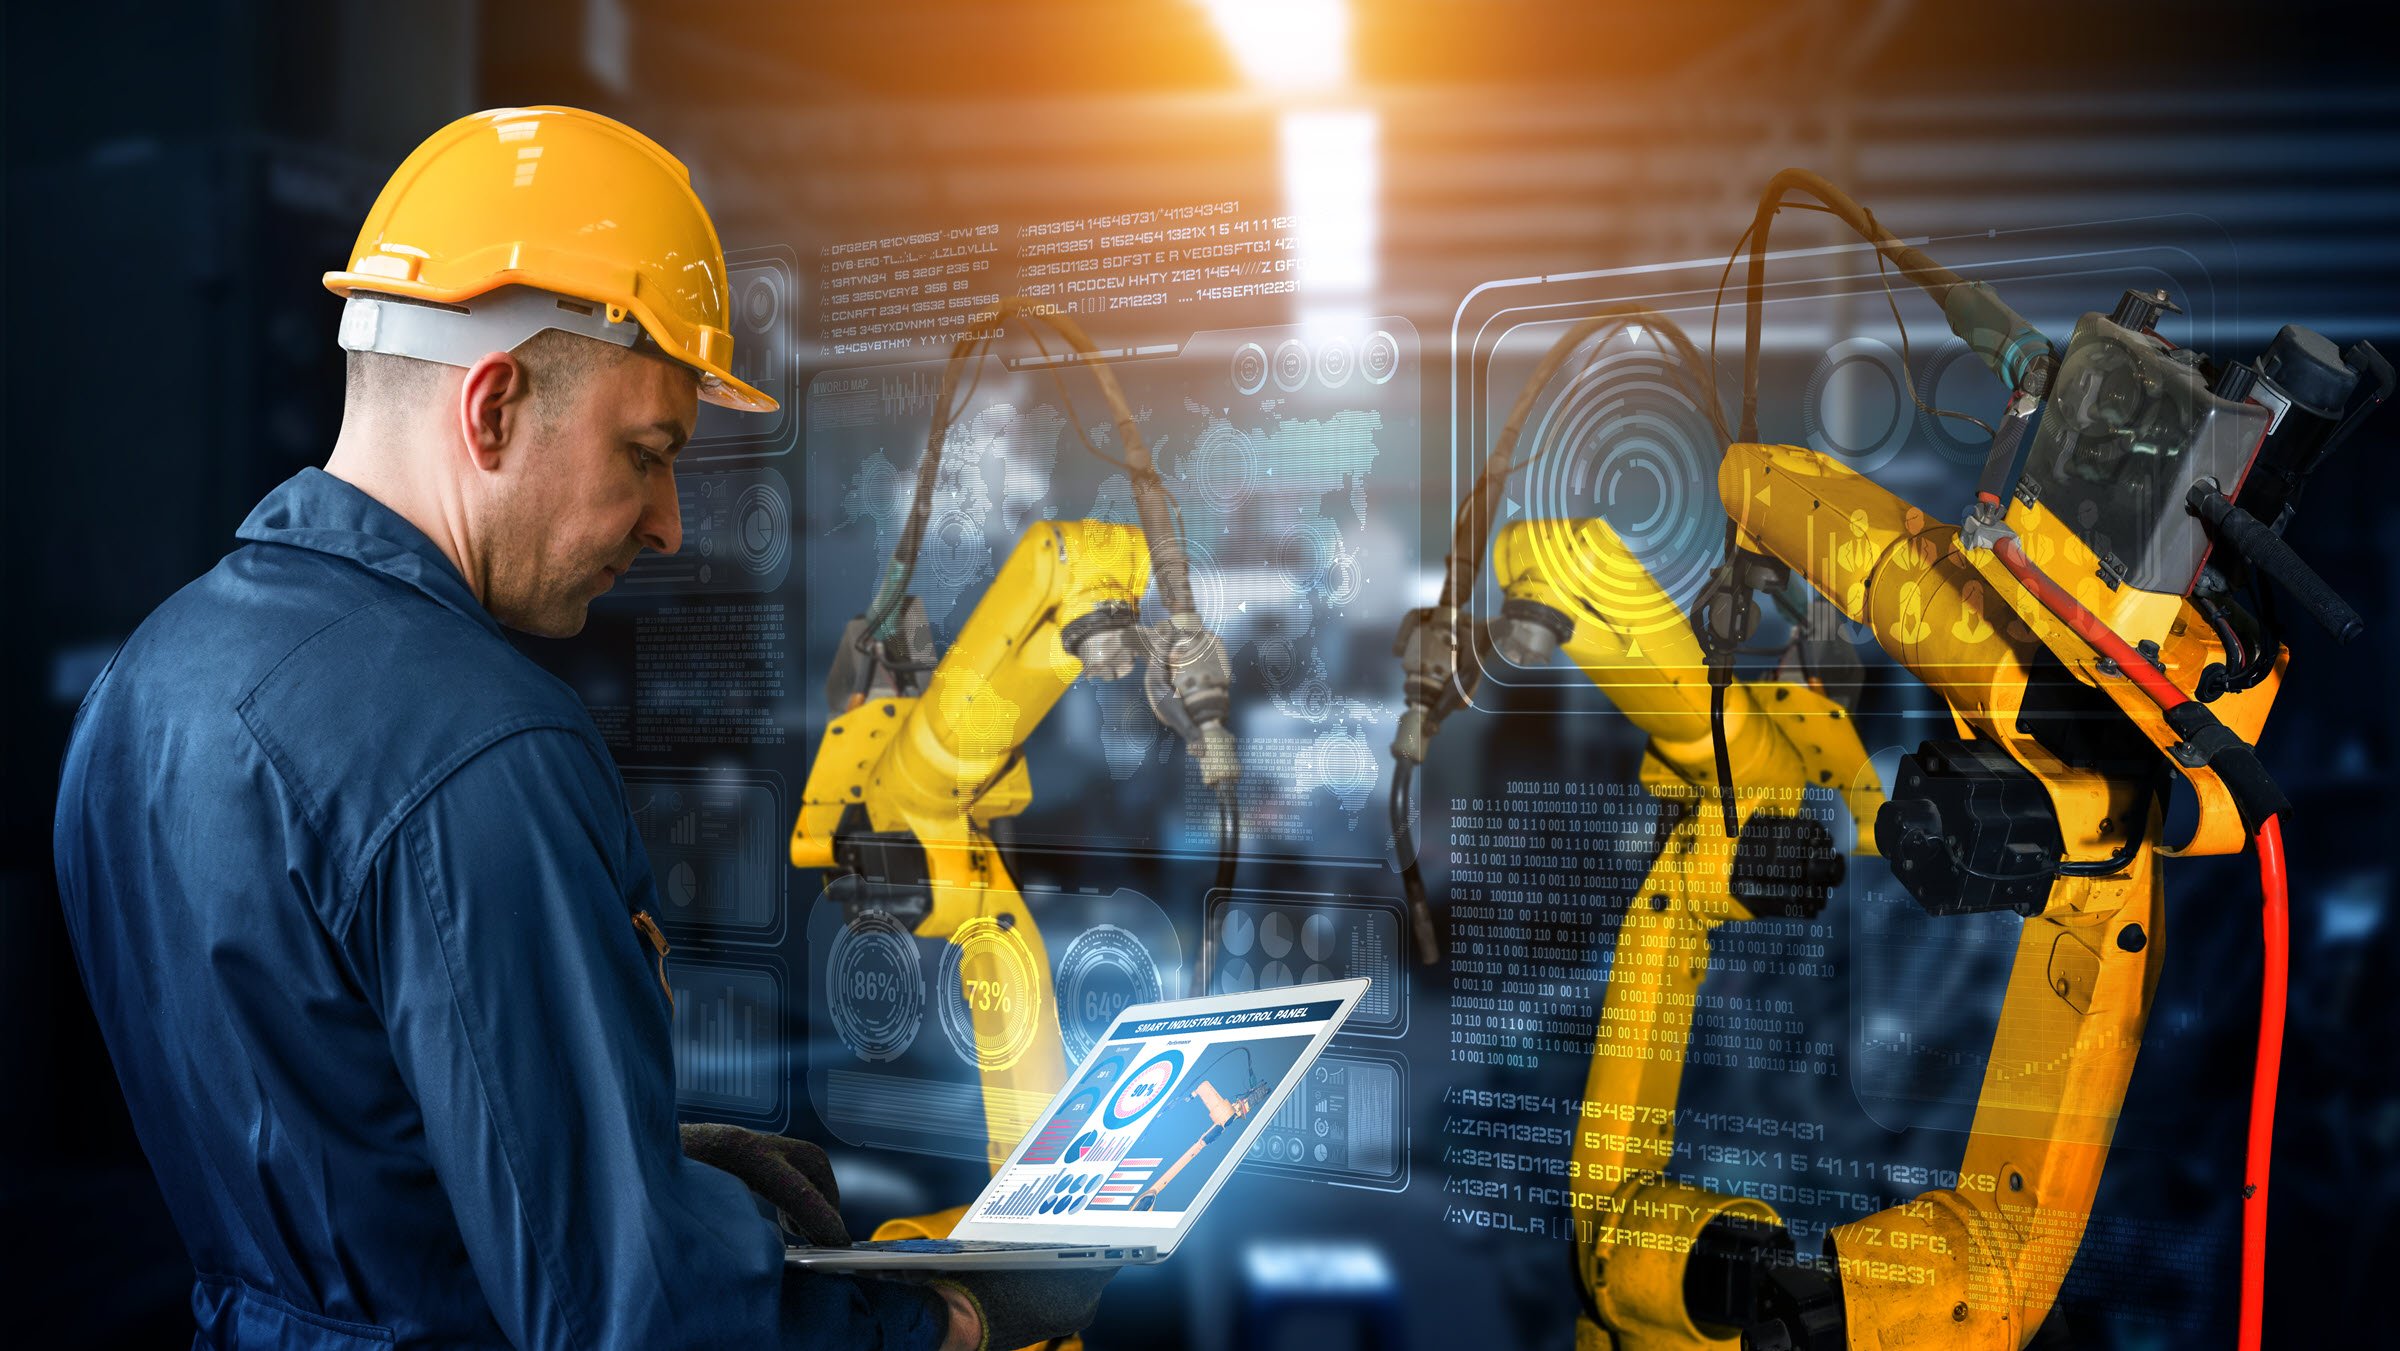 Portrait of an engineer in a yellow hardhat working on smart automated robot arms for digital factory production technology showing automation manufacturing process of the Industry 4.0 or 4th industrial revolution and IOT software to control operation